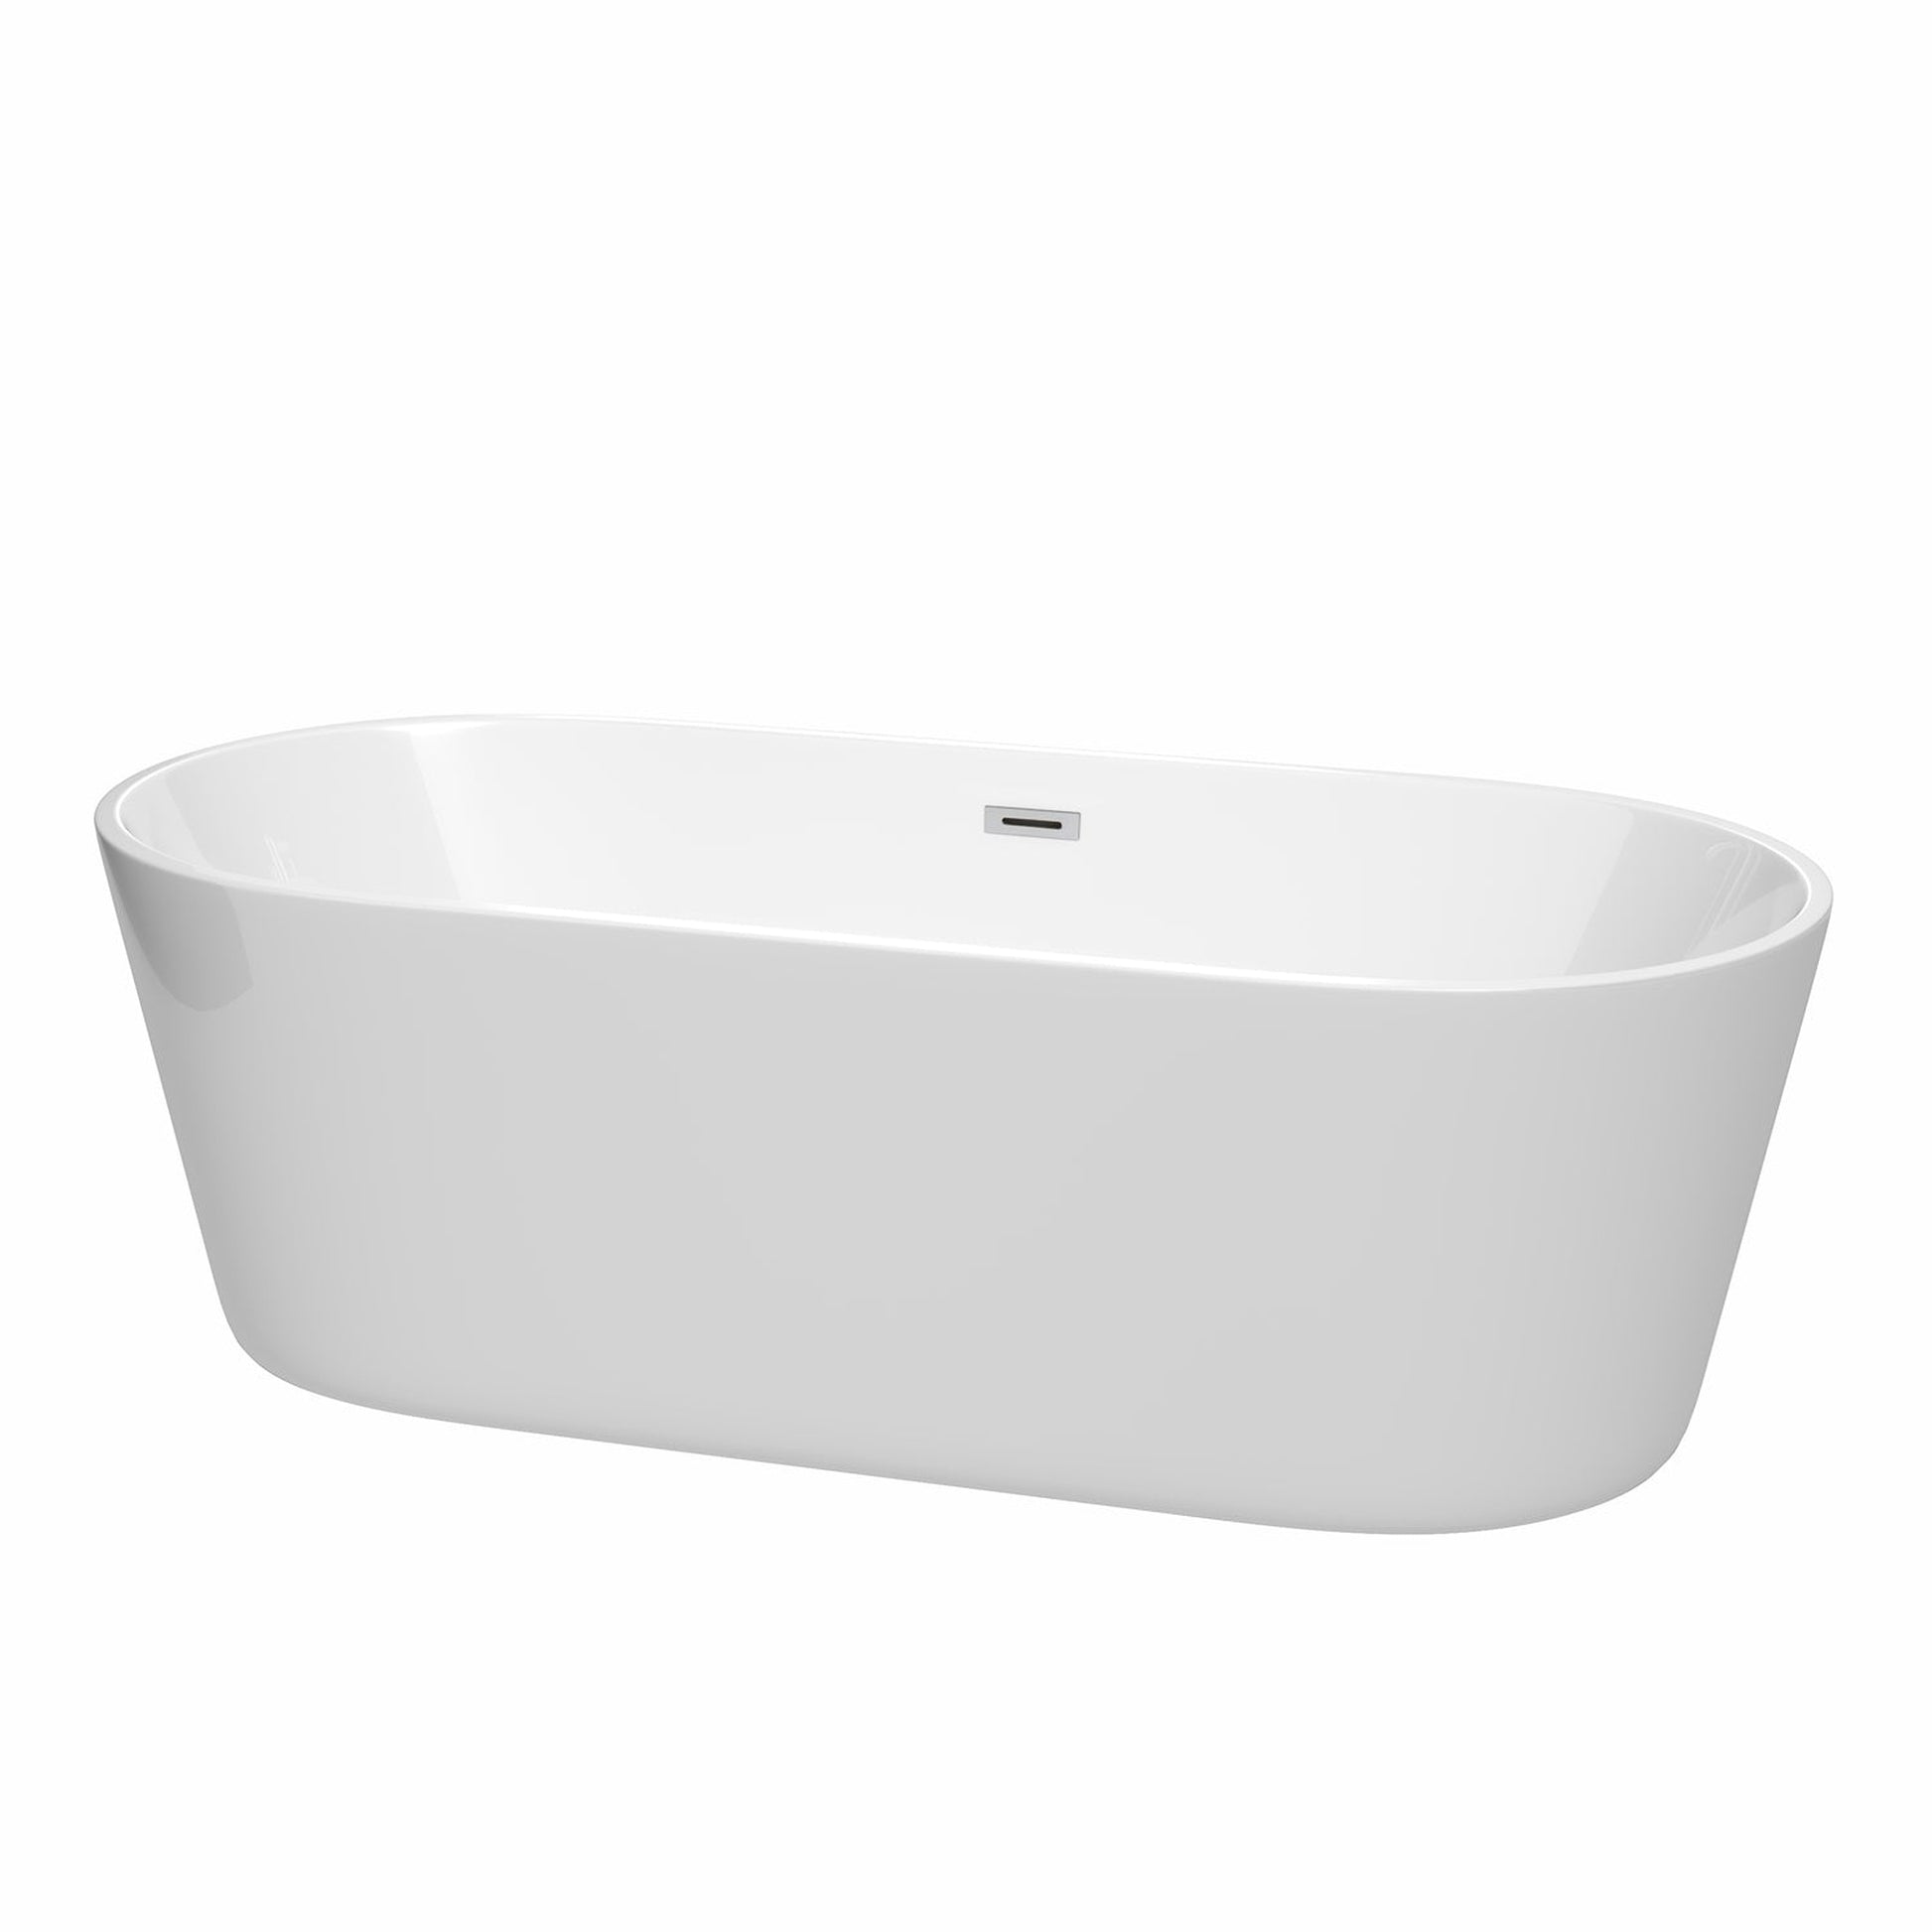 Wyndham Collection Carissa 71" Freestanding Bathtub in White With Polished Chrome Drain and Overflow Trim